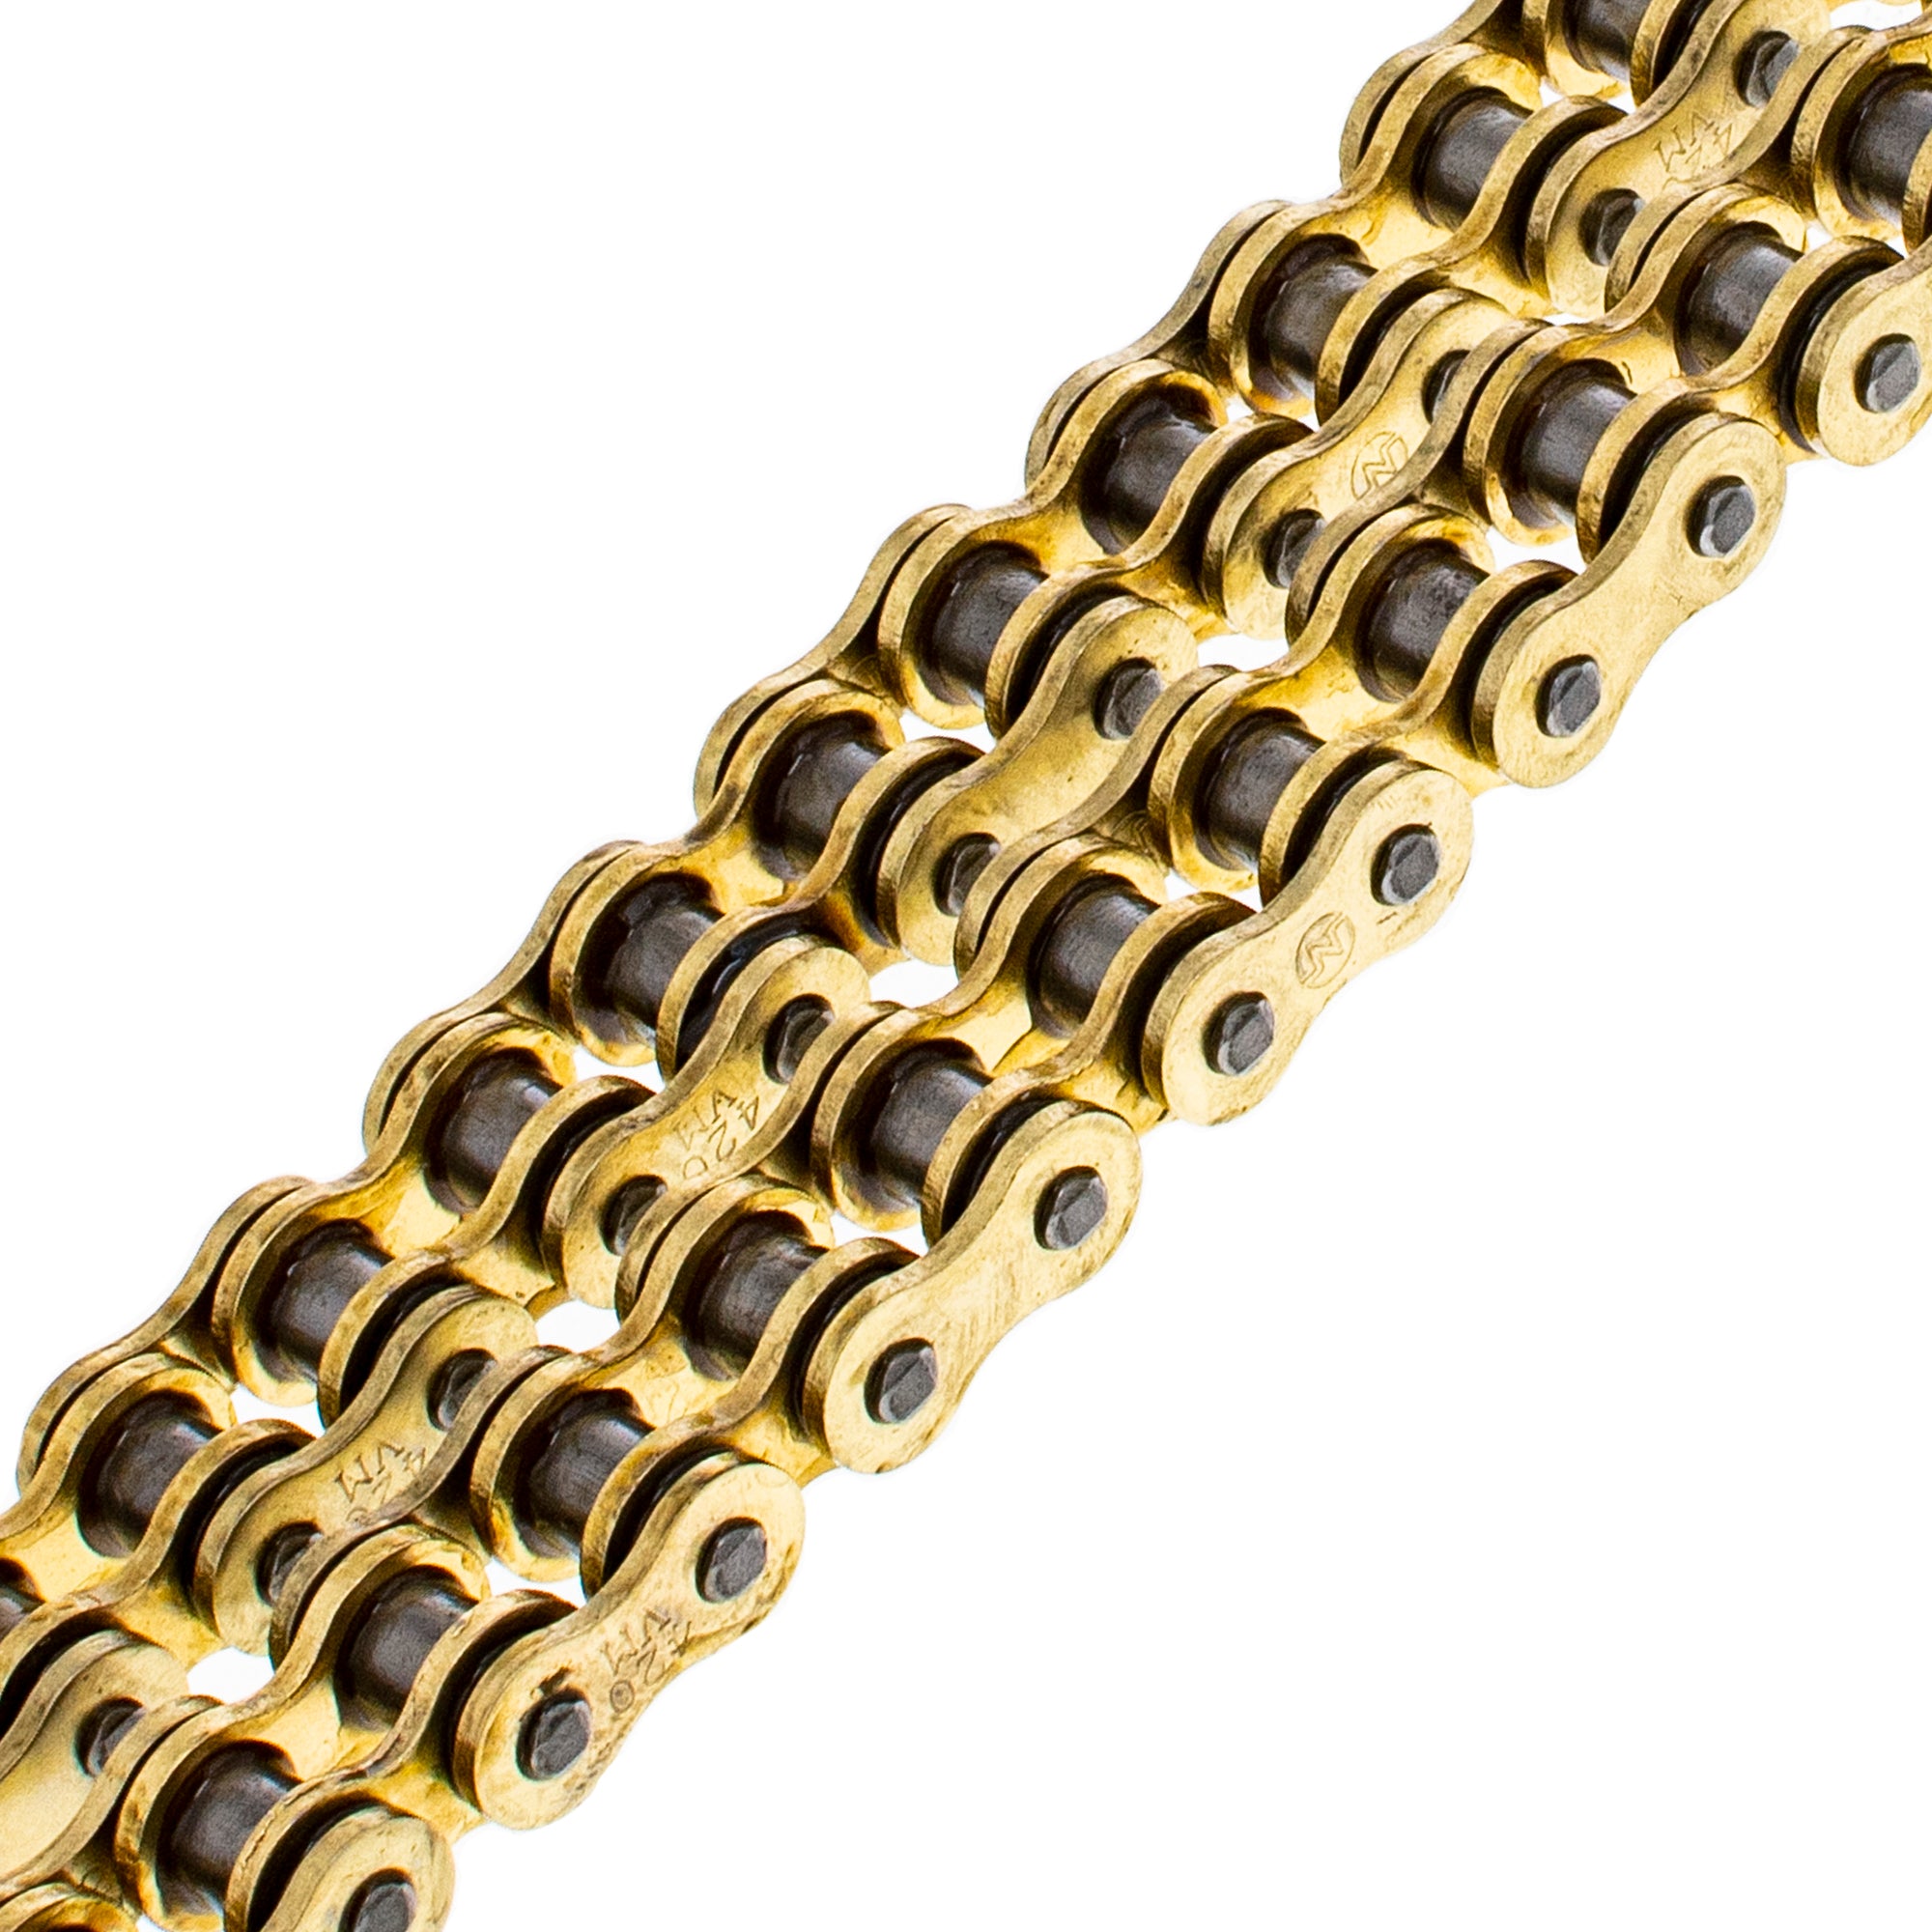 Gold X-Ring Chain 96 w/ Master Link for zOTHER XL80S C70 5489 NICHE 519-CDC2590H